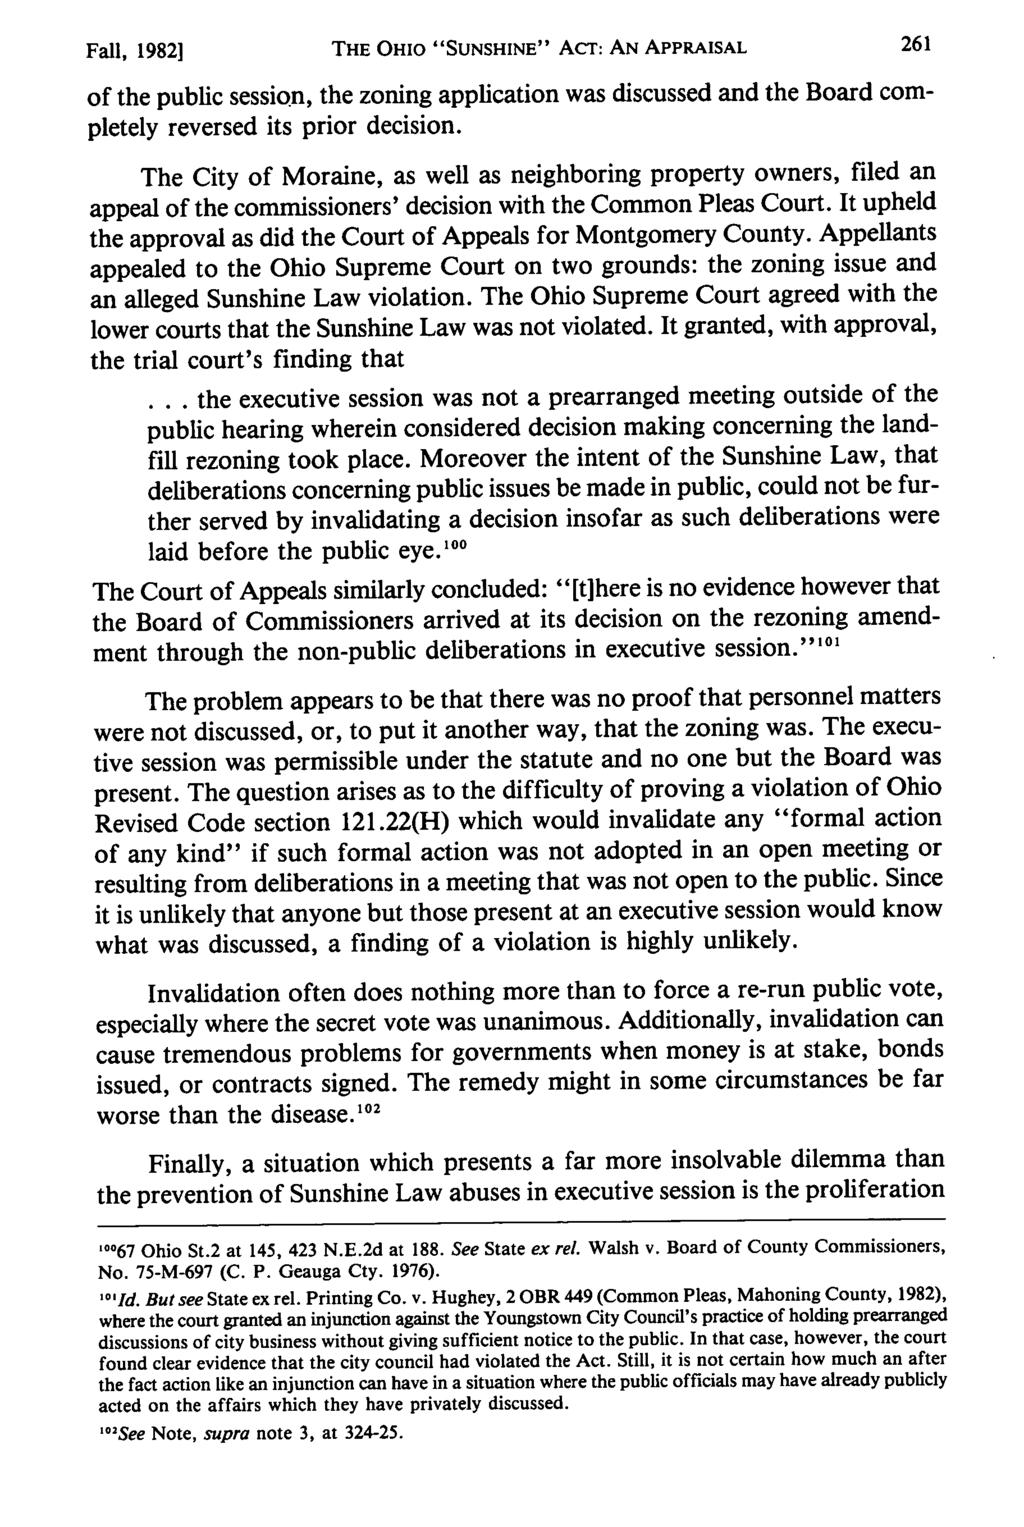 Fall, 1982] THE OHIO "SUNSHINE" ACT: AN APPRAISAL of the public session, the zoning application was discussed and the Board completely reversed its prior decision.